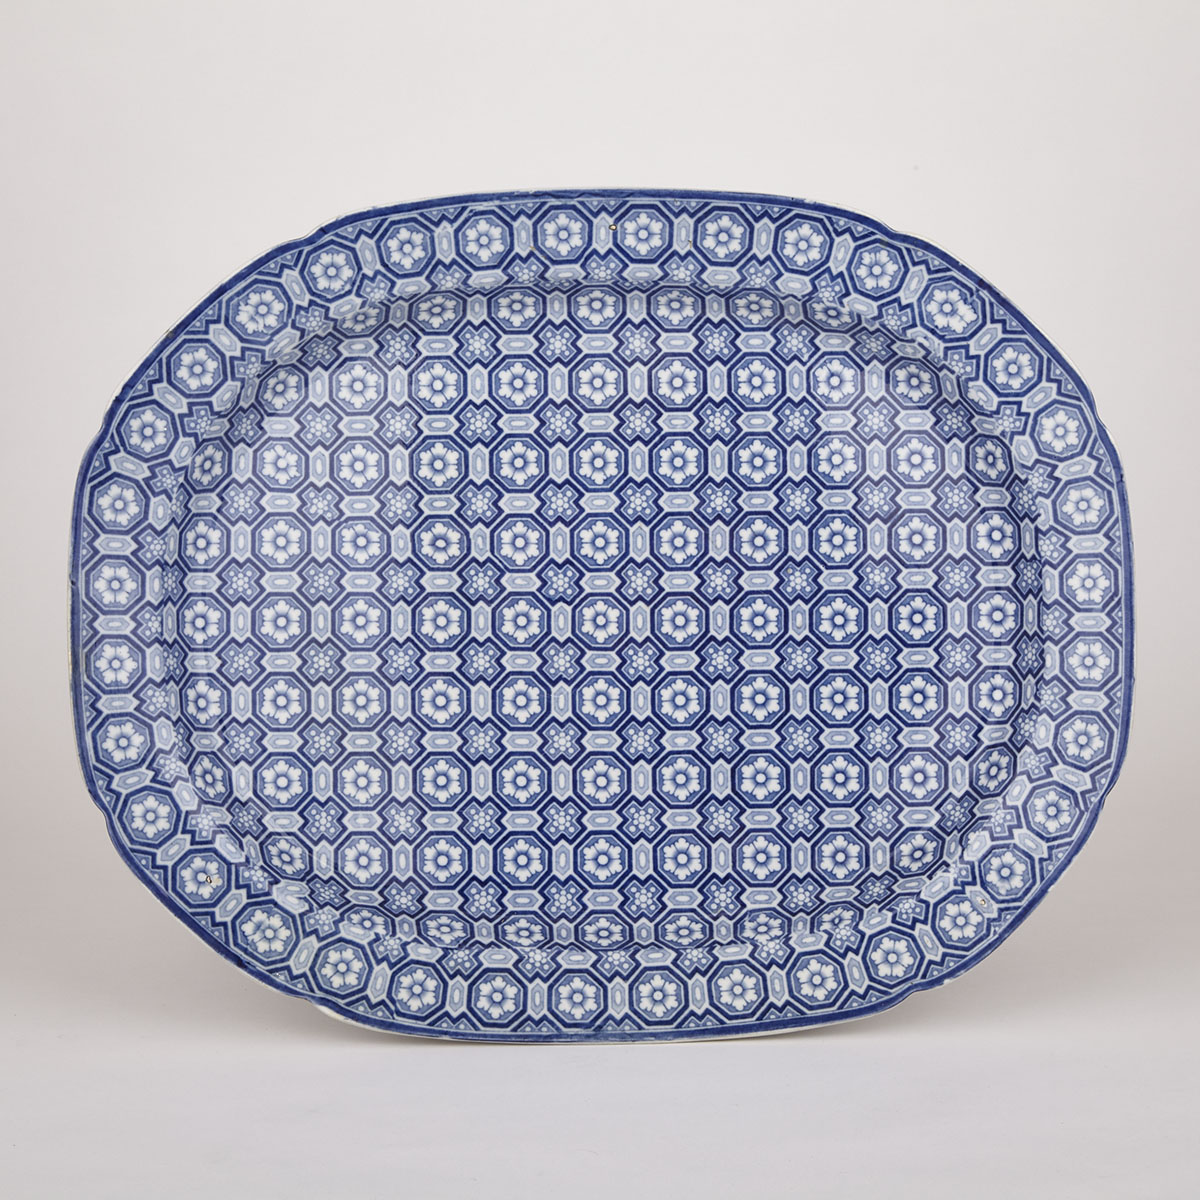 English Blue Printed Pearlware Geometric Sheet Pattern Oval Platter, early 19th century